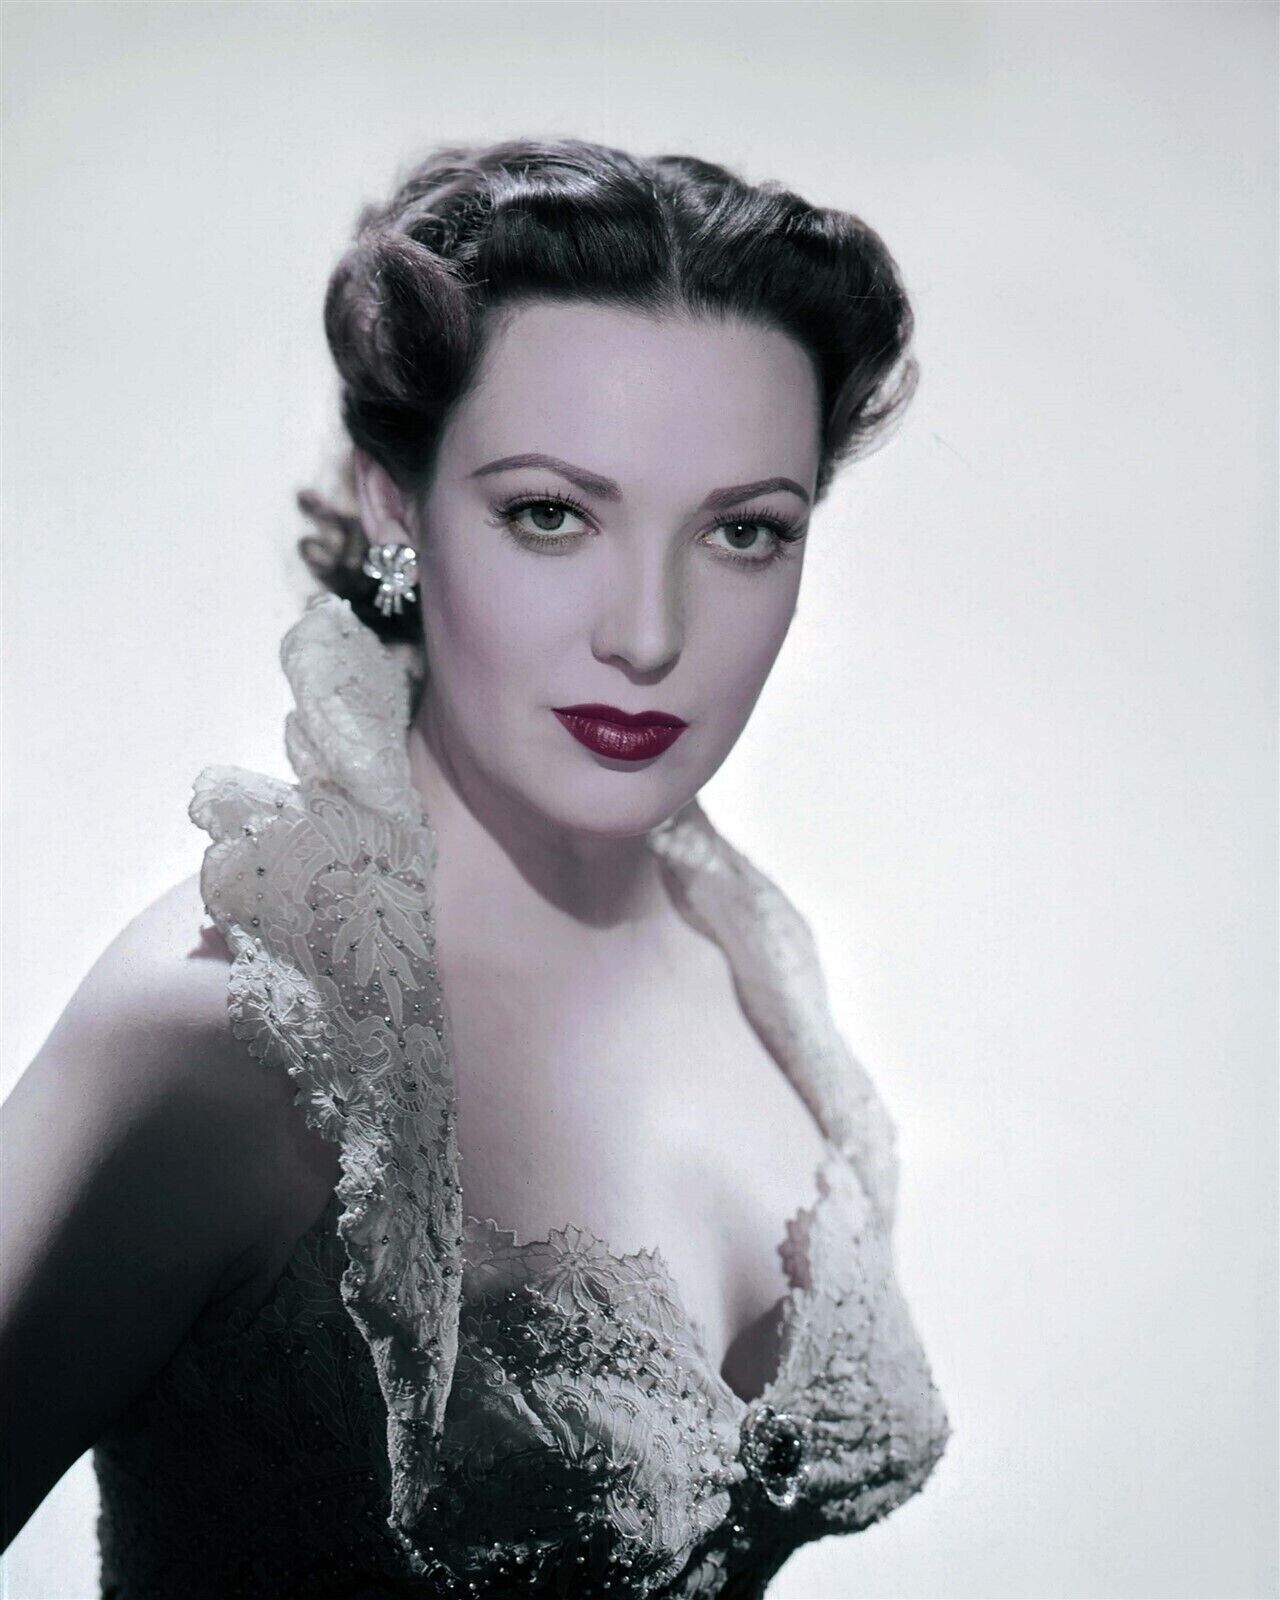 Linda Darnell stunning 1940\'s portrait bare shoulder low cut gown 4x6 photo